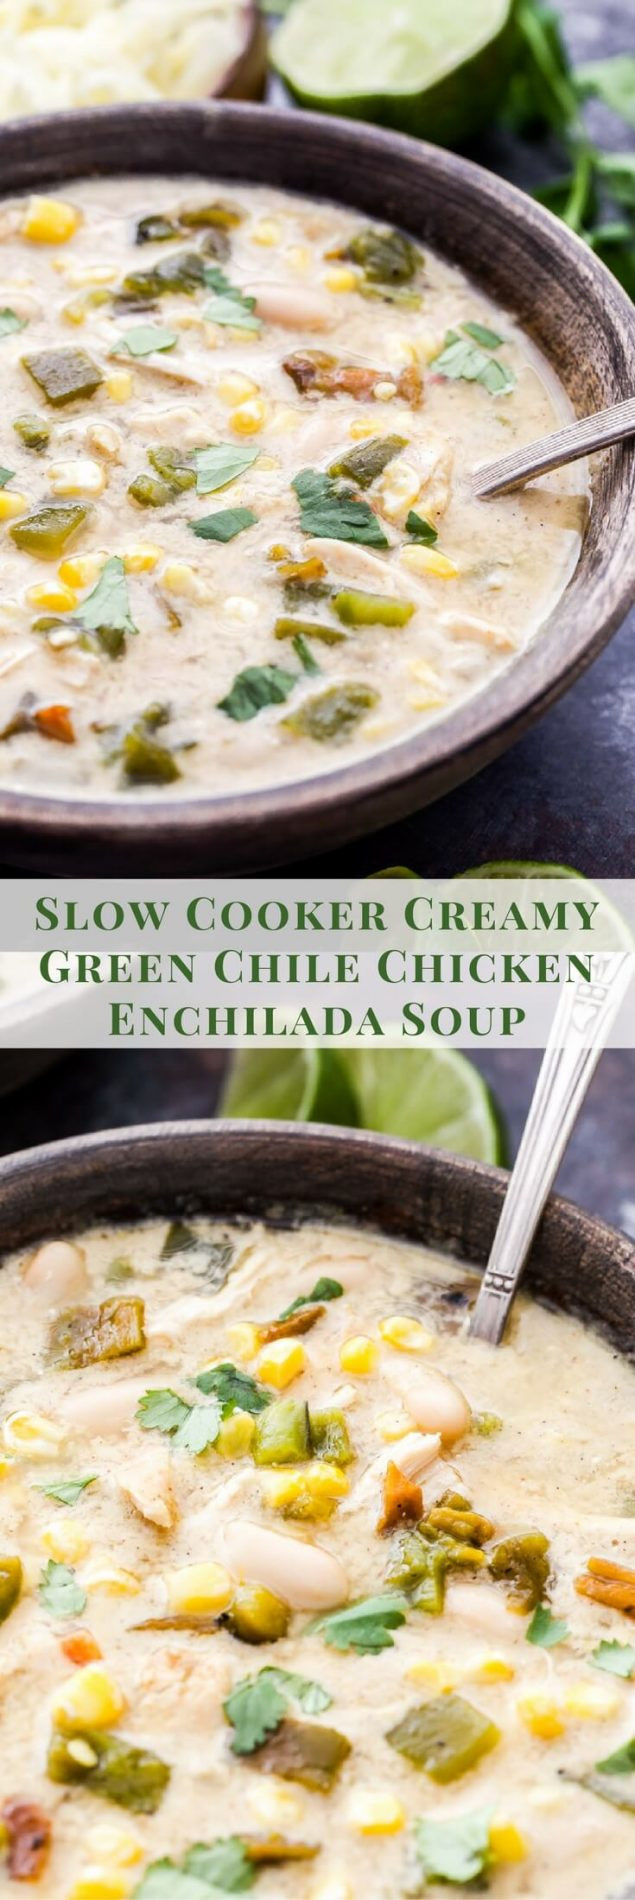 21 Of the Best Ideas for Slow Cooker Green Chile Chicken Enchiladas ...